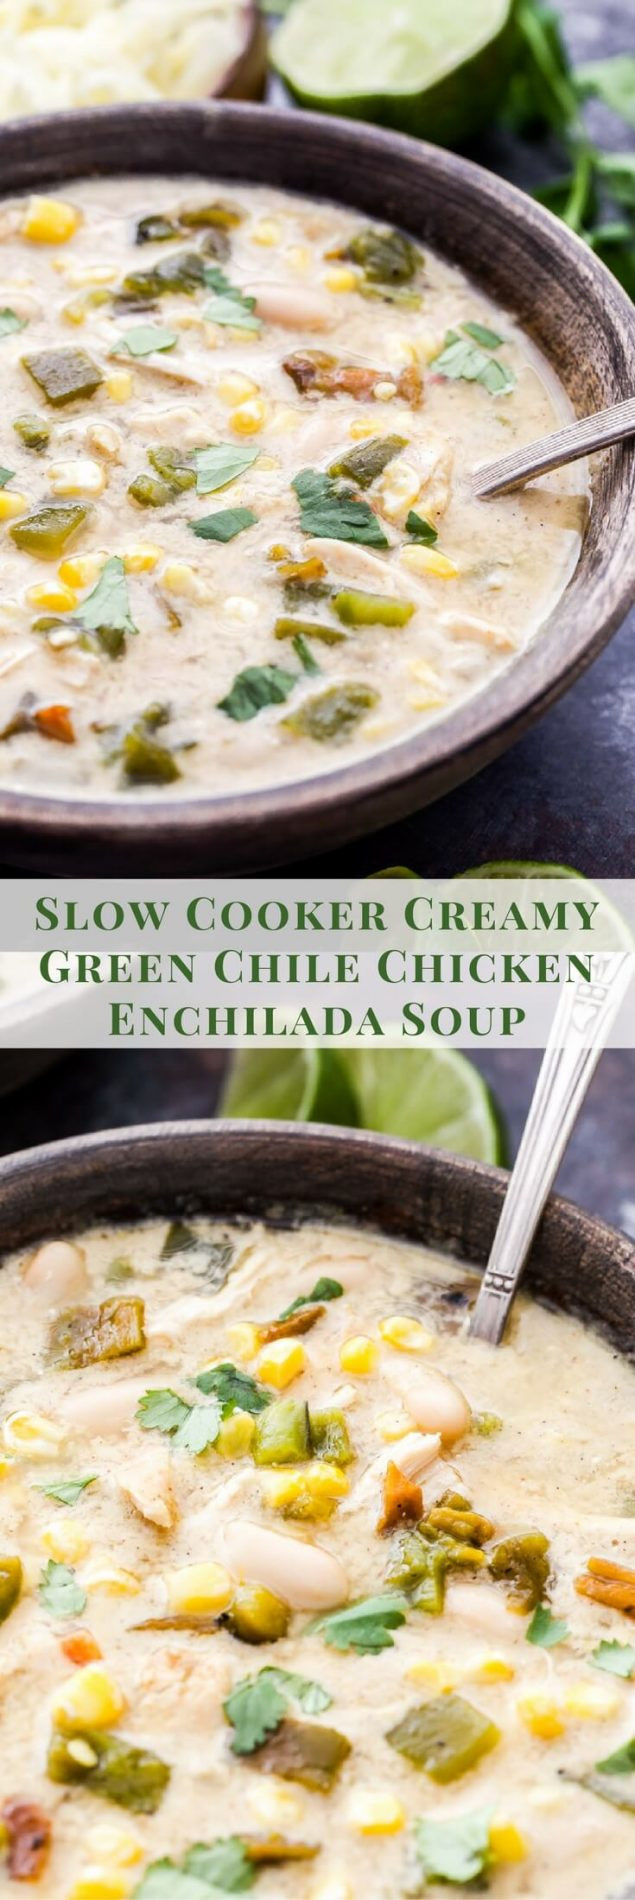 21 Of the Best Ideas for Slow Cooker Green Chile Chicken Enchiladas ...